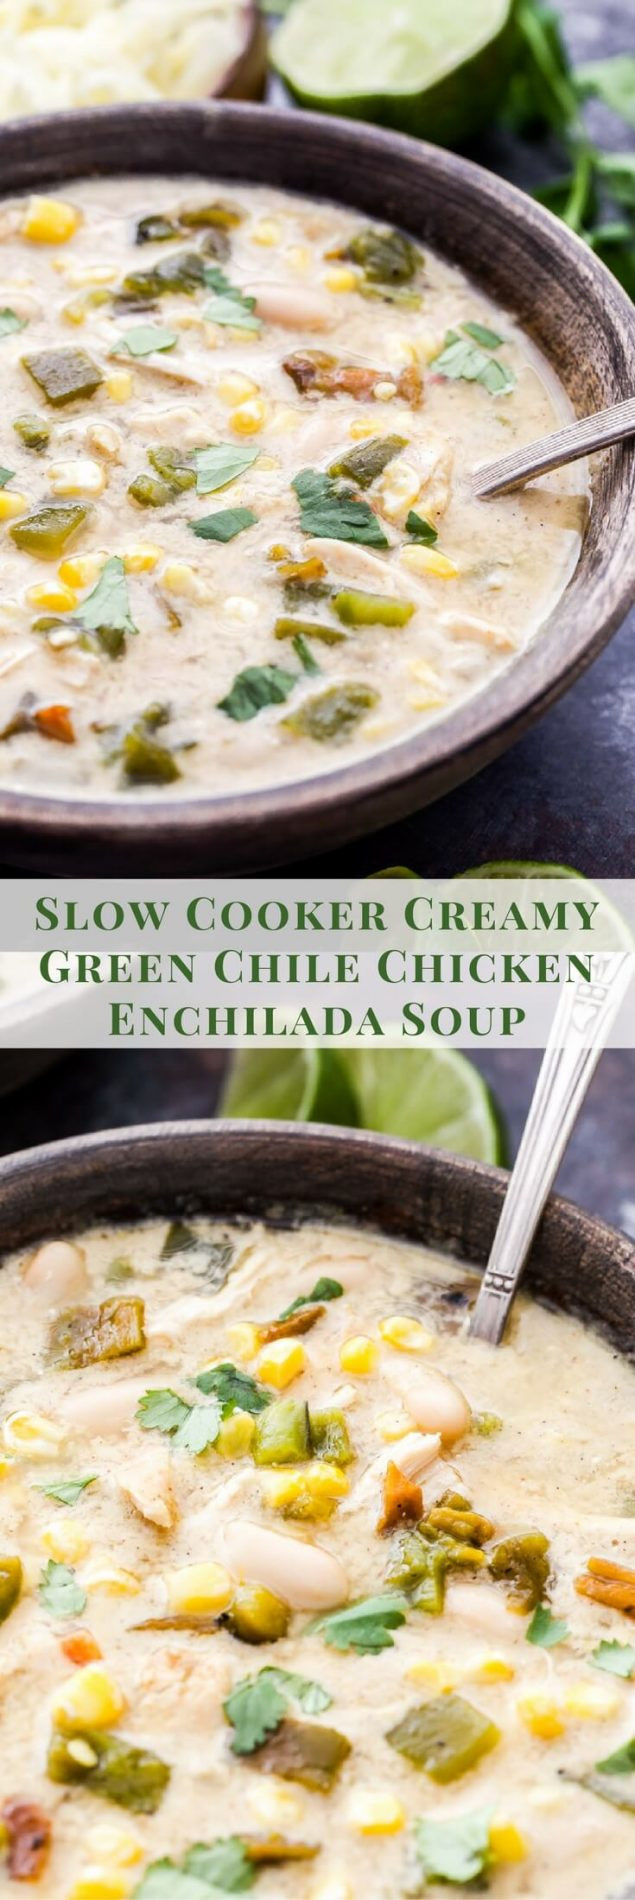 21 Of the Best Ideas for Slow Cooker Green Chile Chicken Enchiladas ...